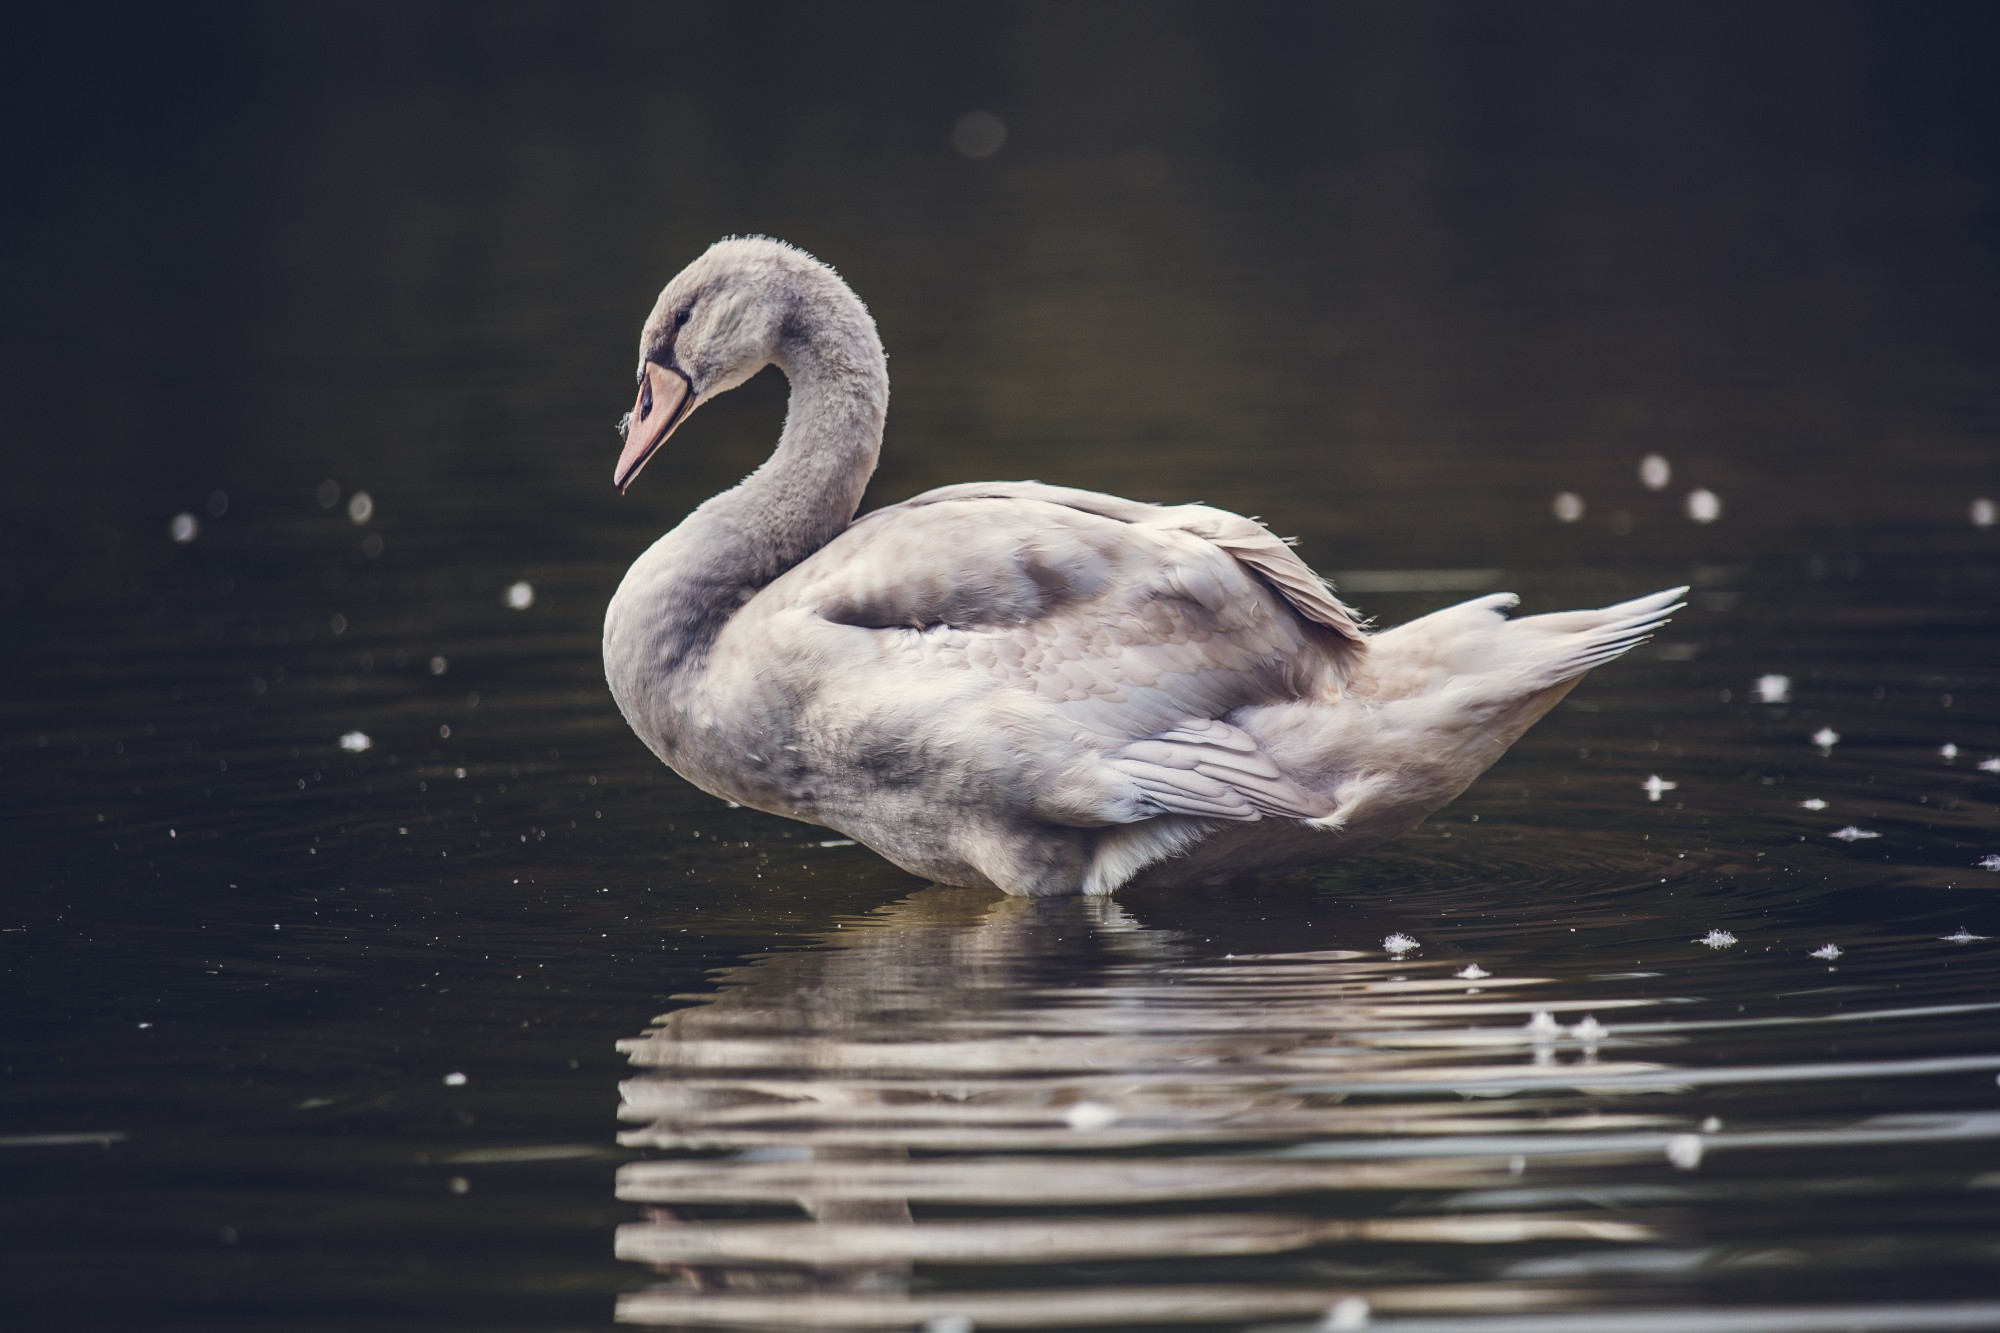 What Color is that Swan? – Towards Data Science